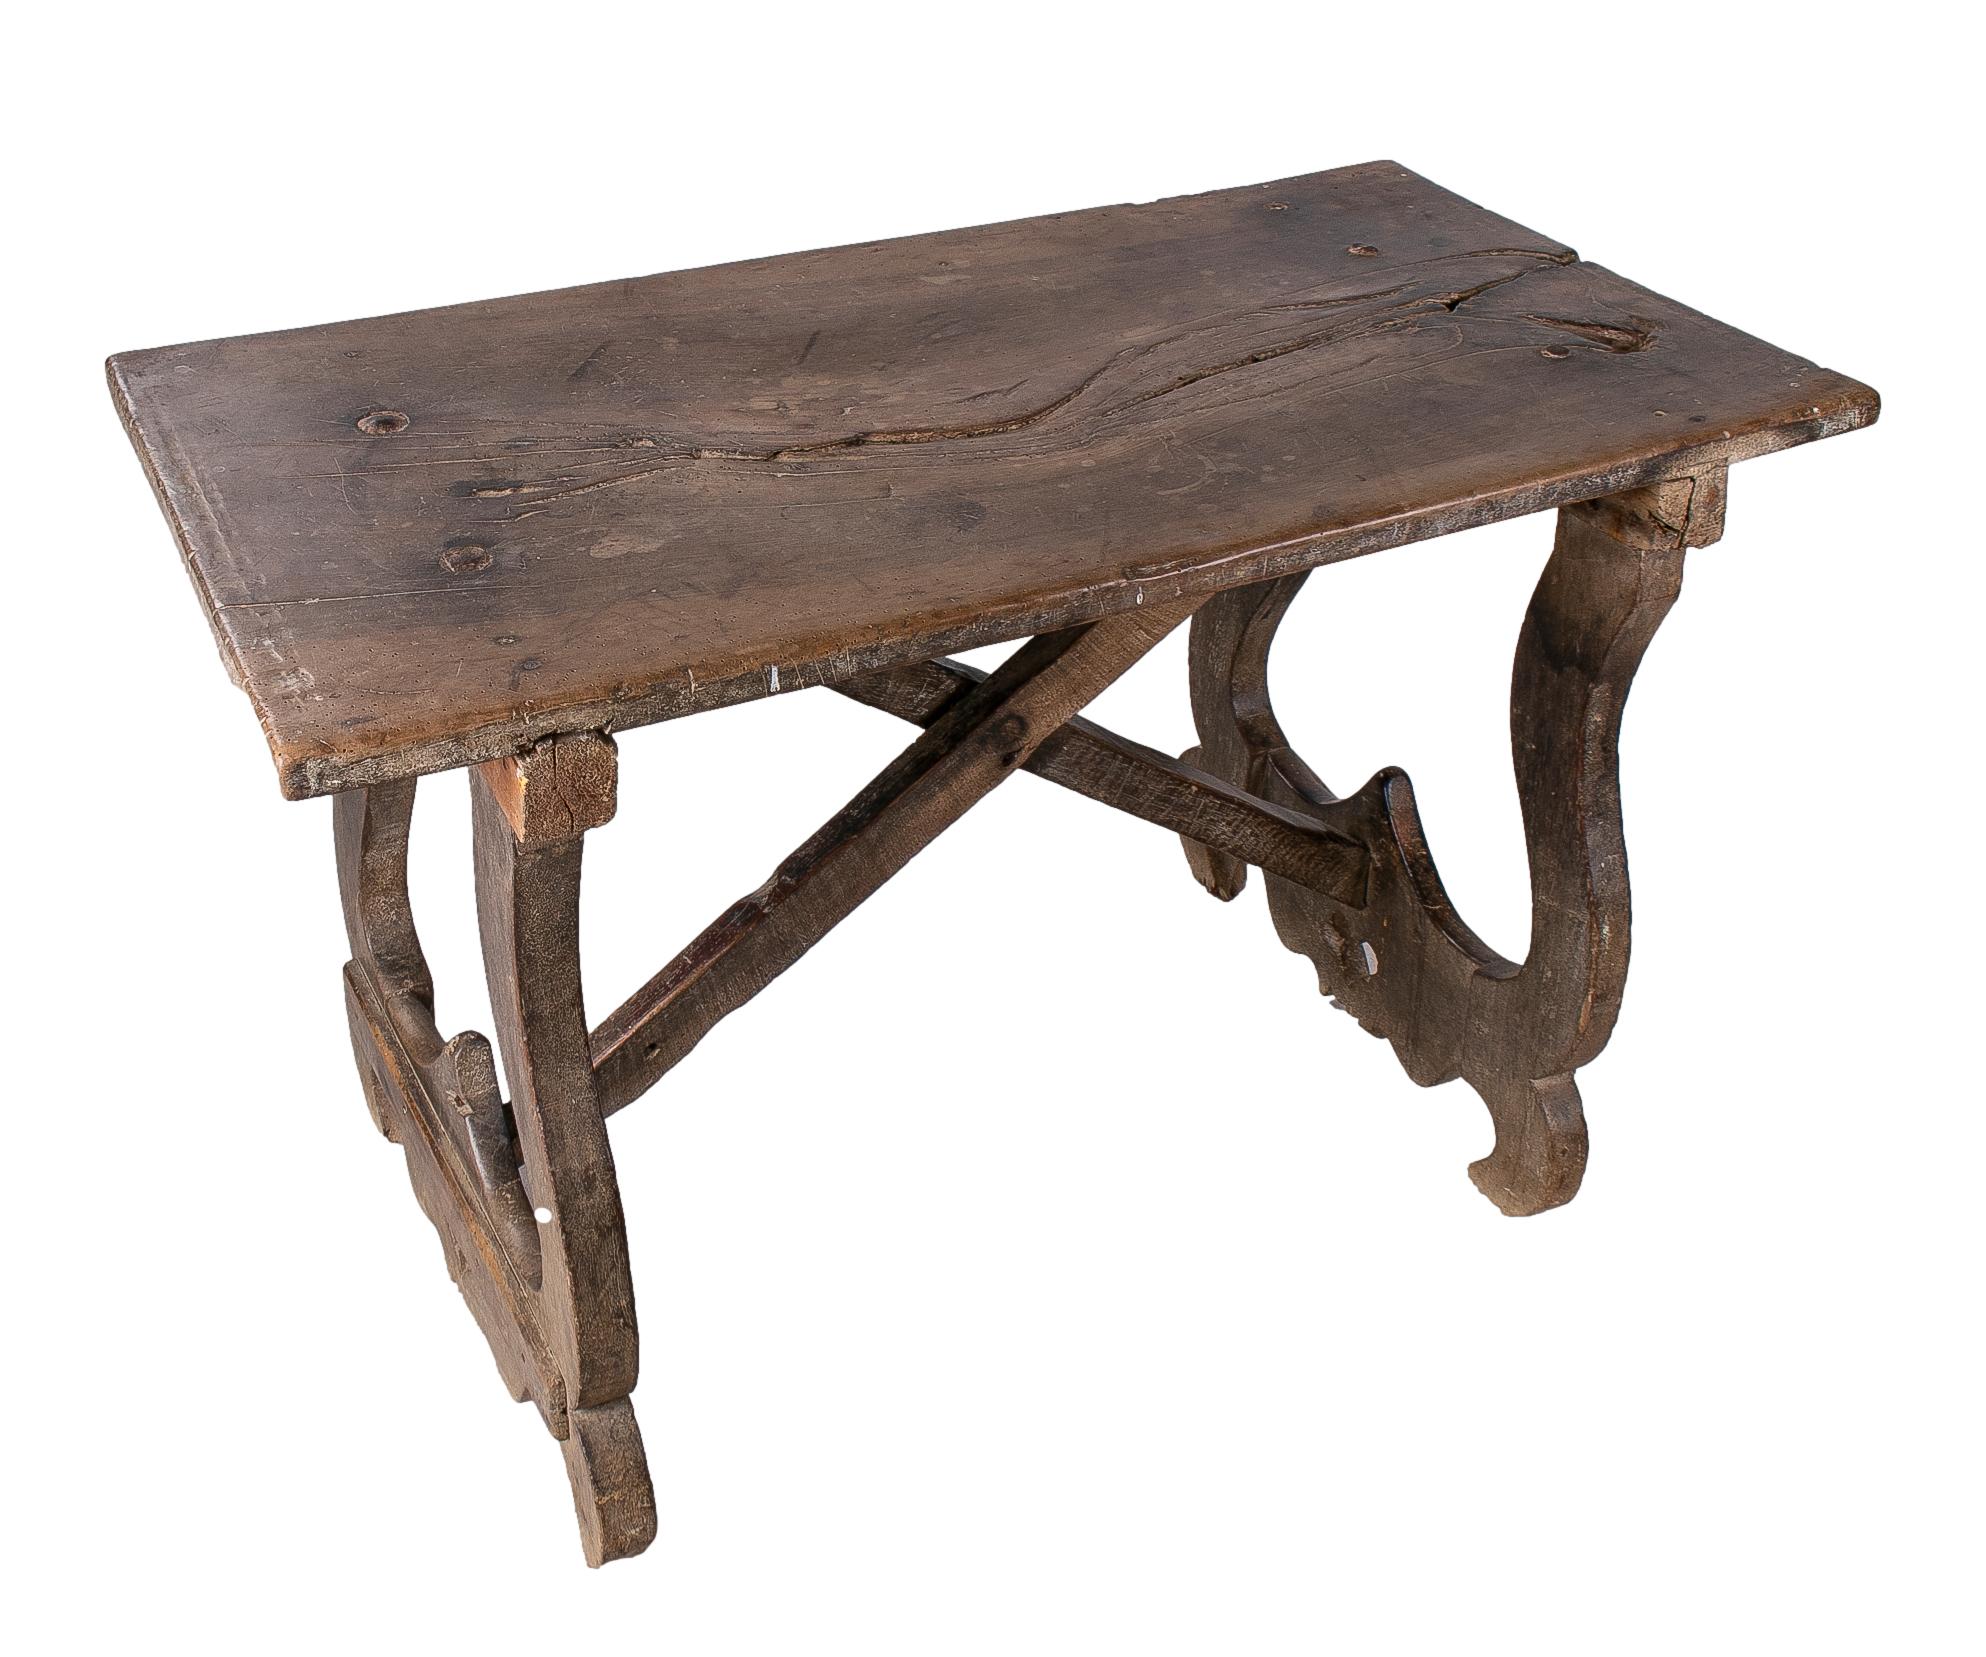 18th century Spanish wooden table with lyre legs and crossbeams.